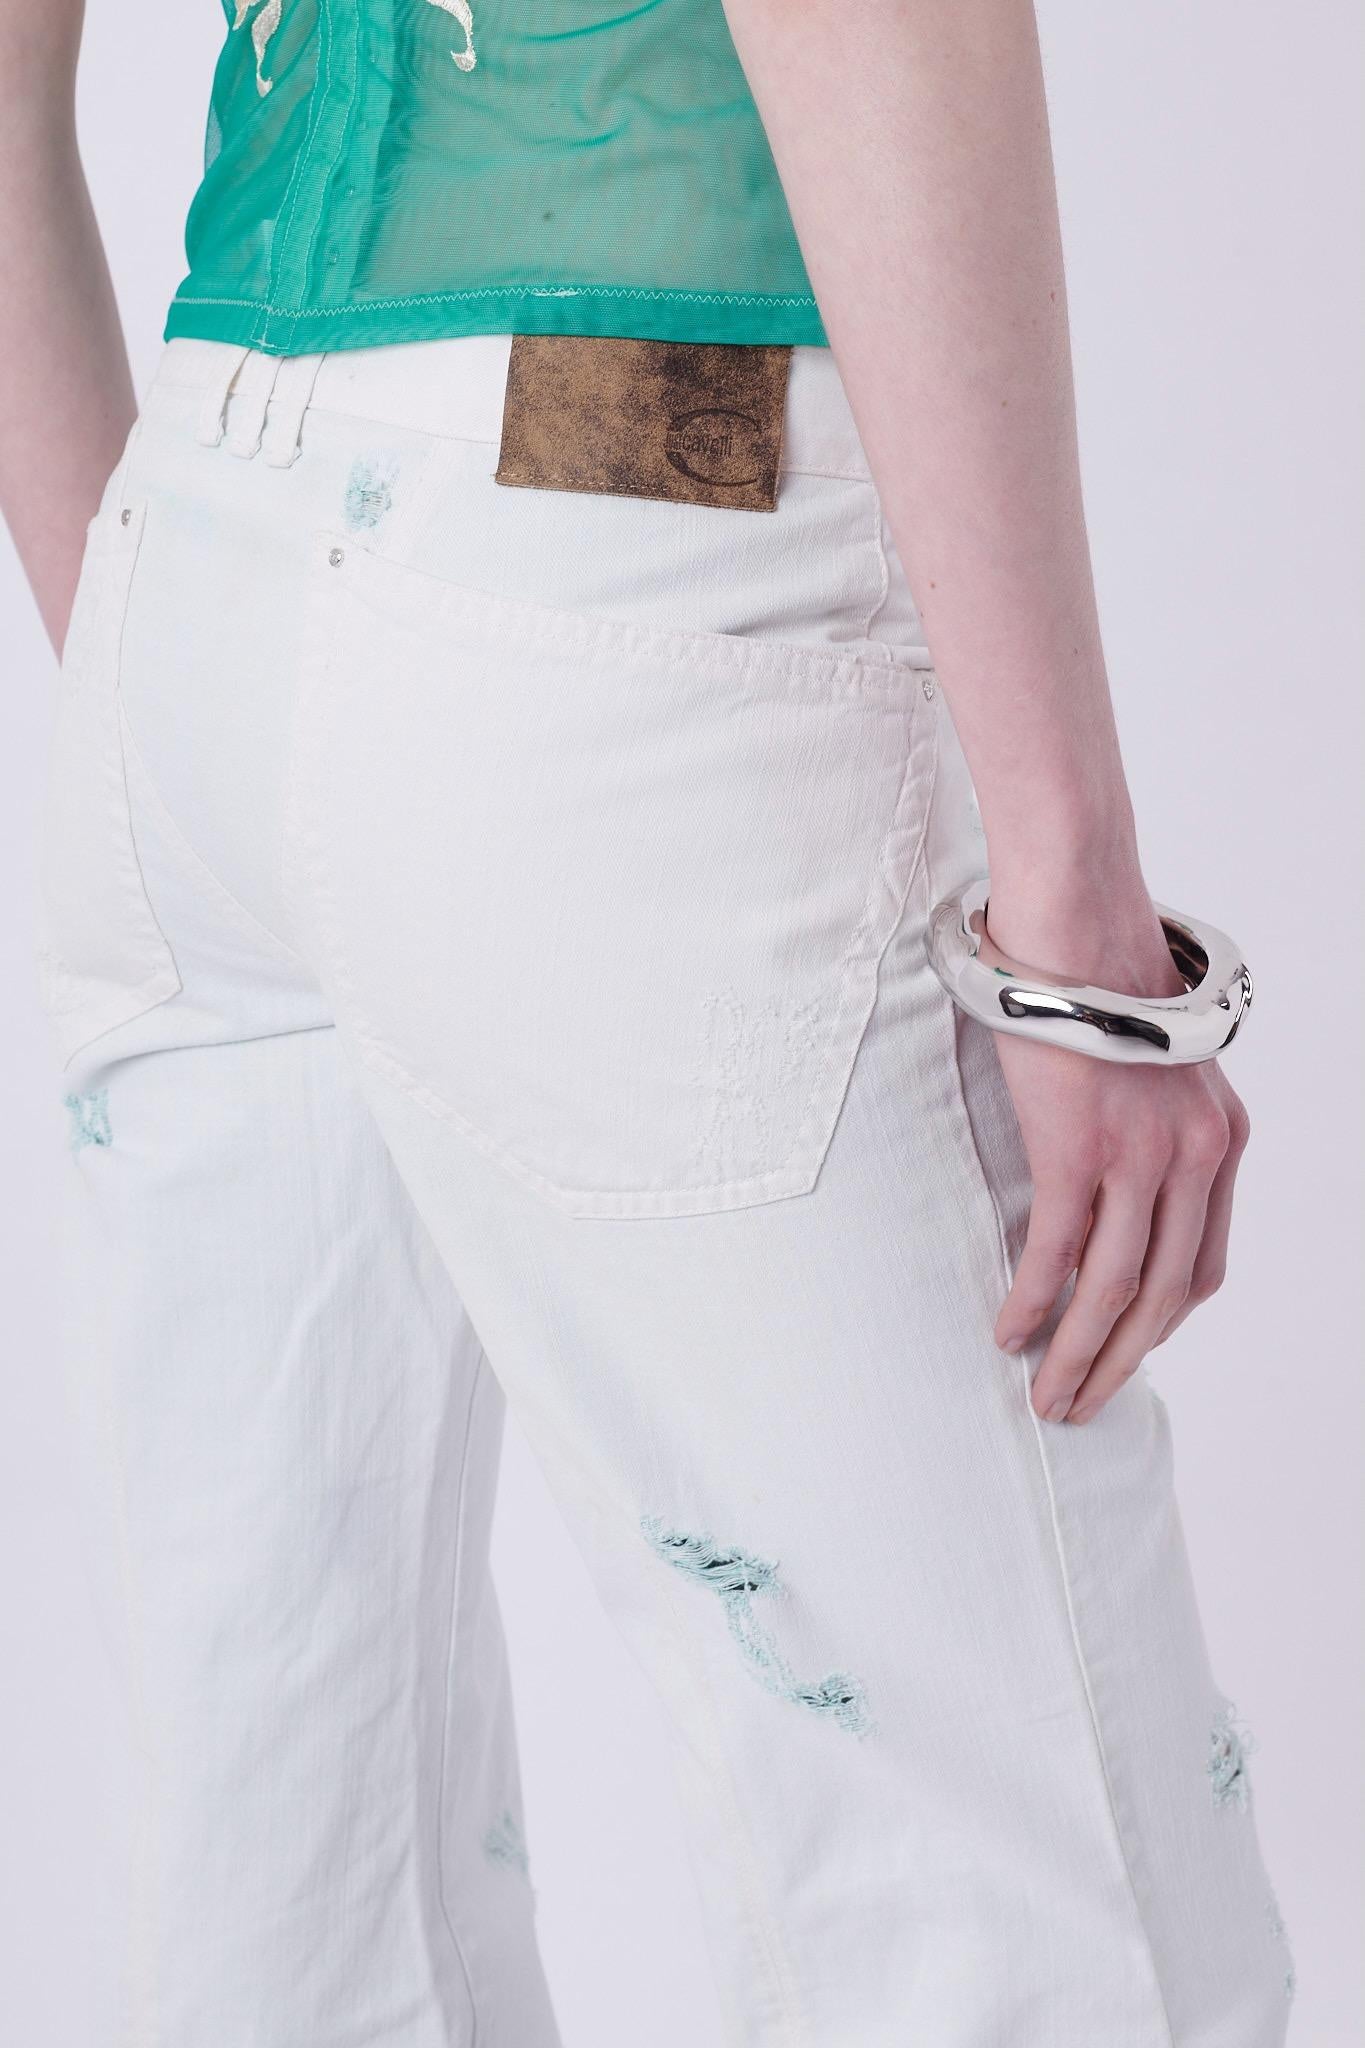 Roberto Cavalli 2004 Bleached Distressed Jeans In Excellent Condition For Sale In London, GB